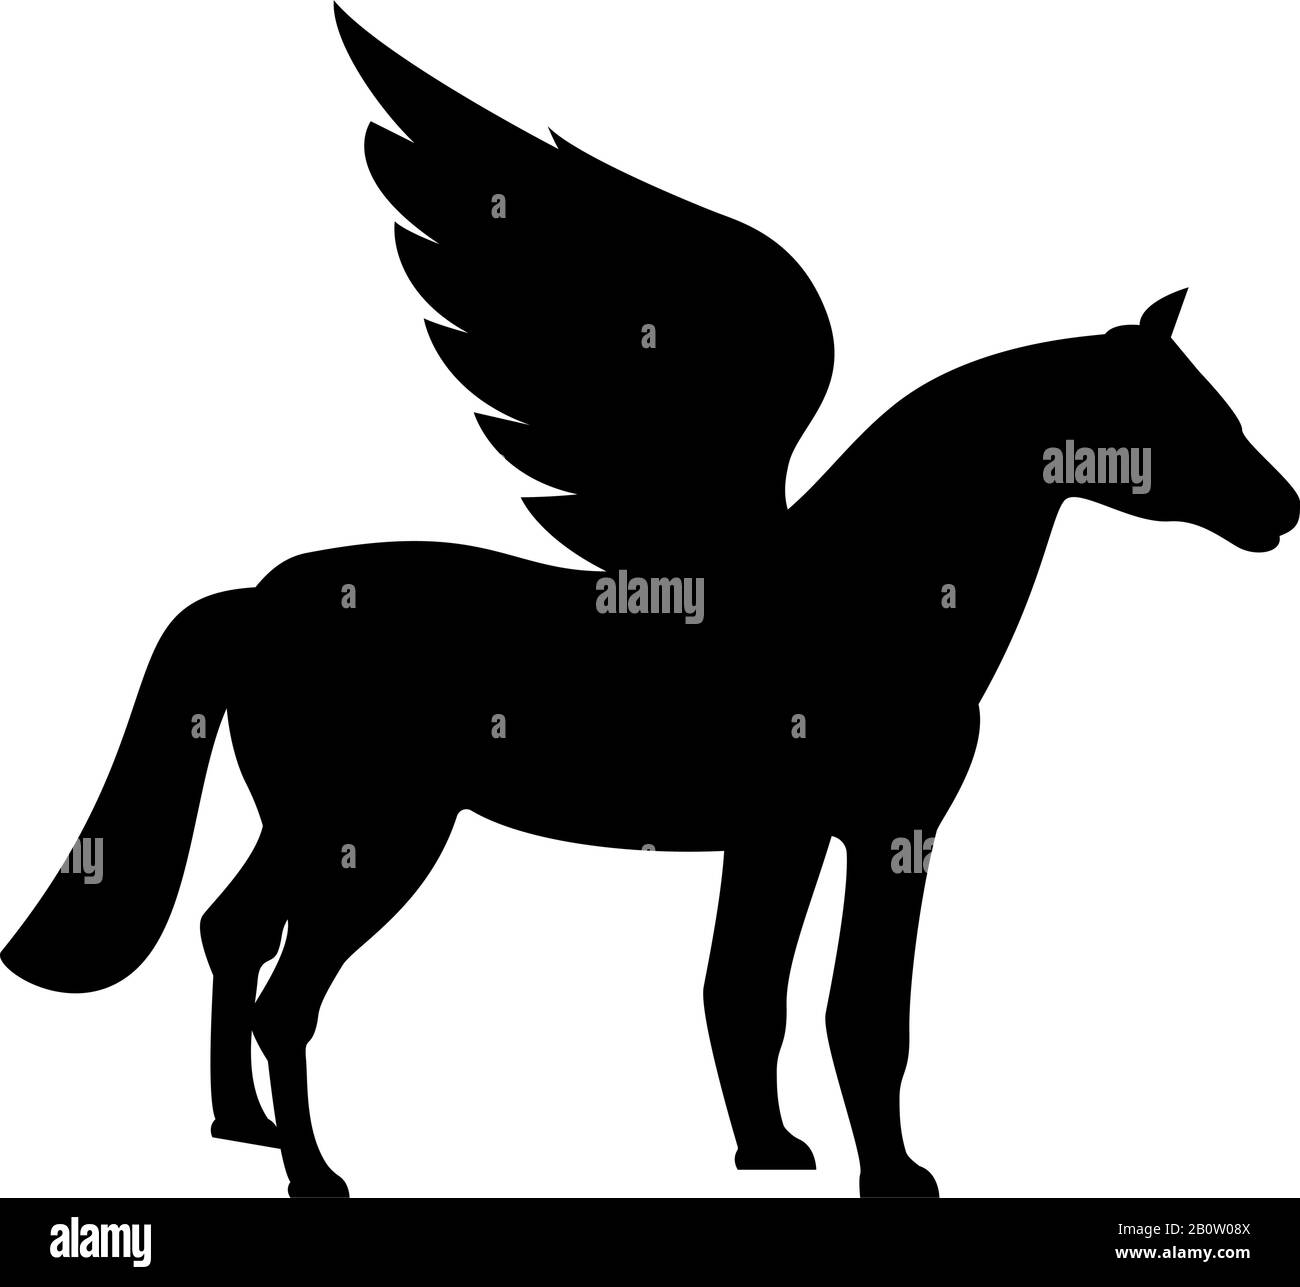 Pegasus Winged horse silhouette Mythical creature Fabulous animal icon black color vector illustration flat style simple image Stock Vector